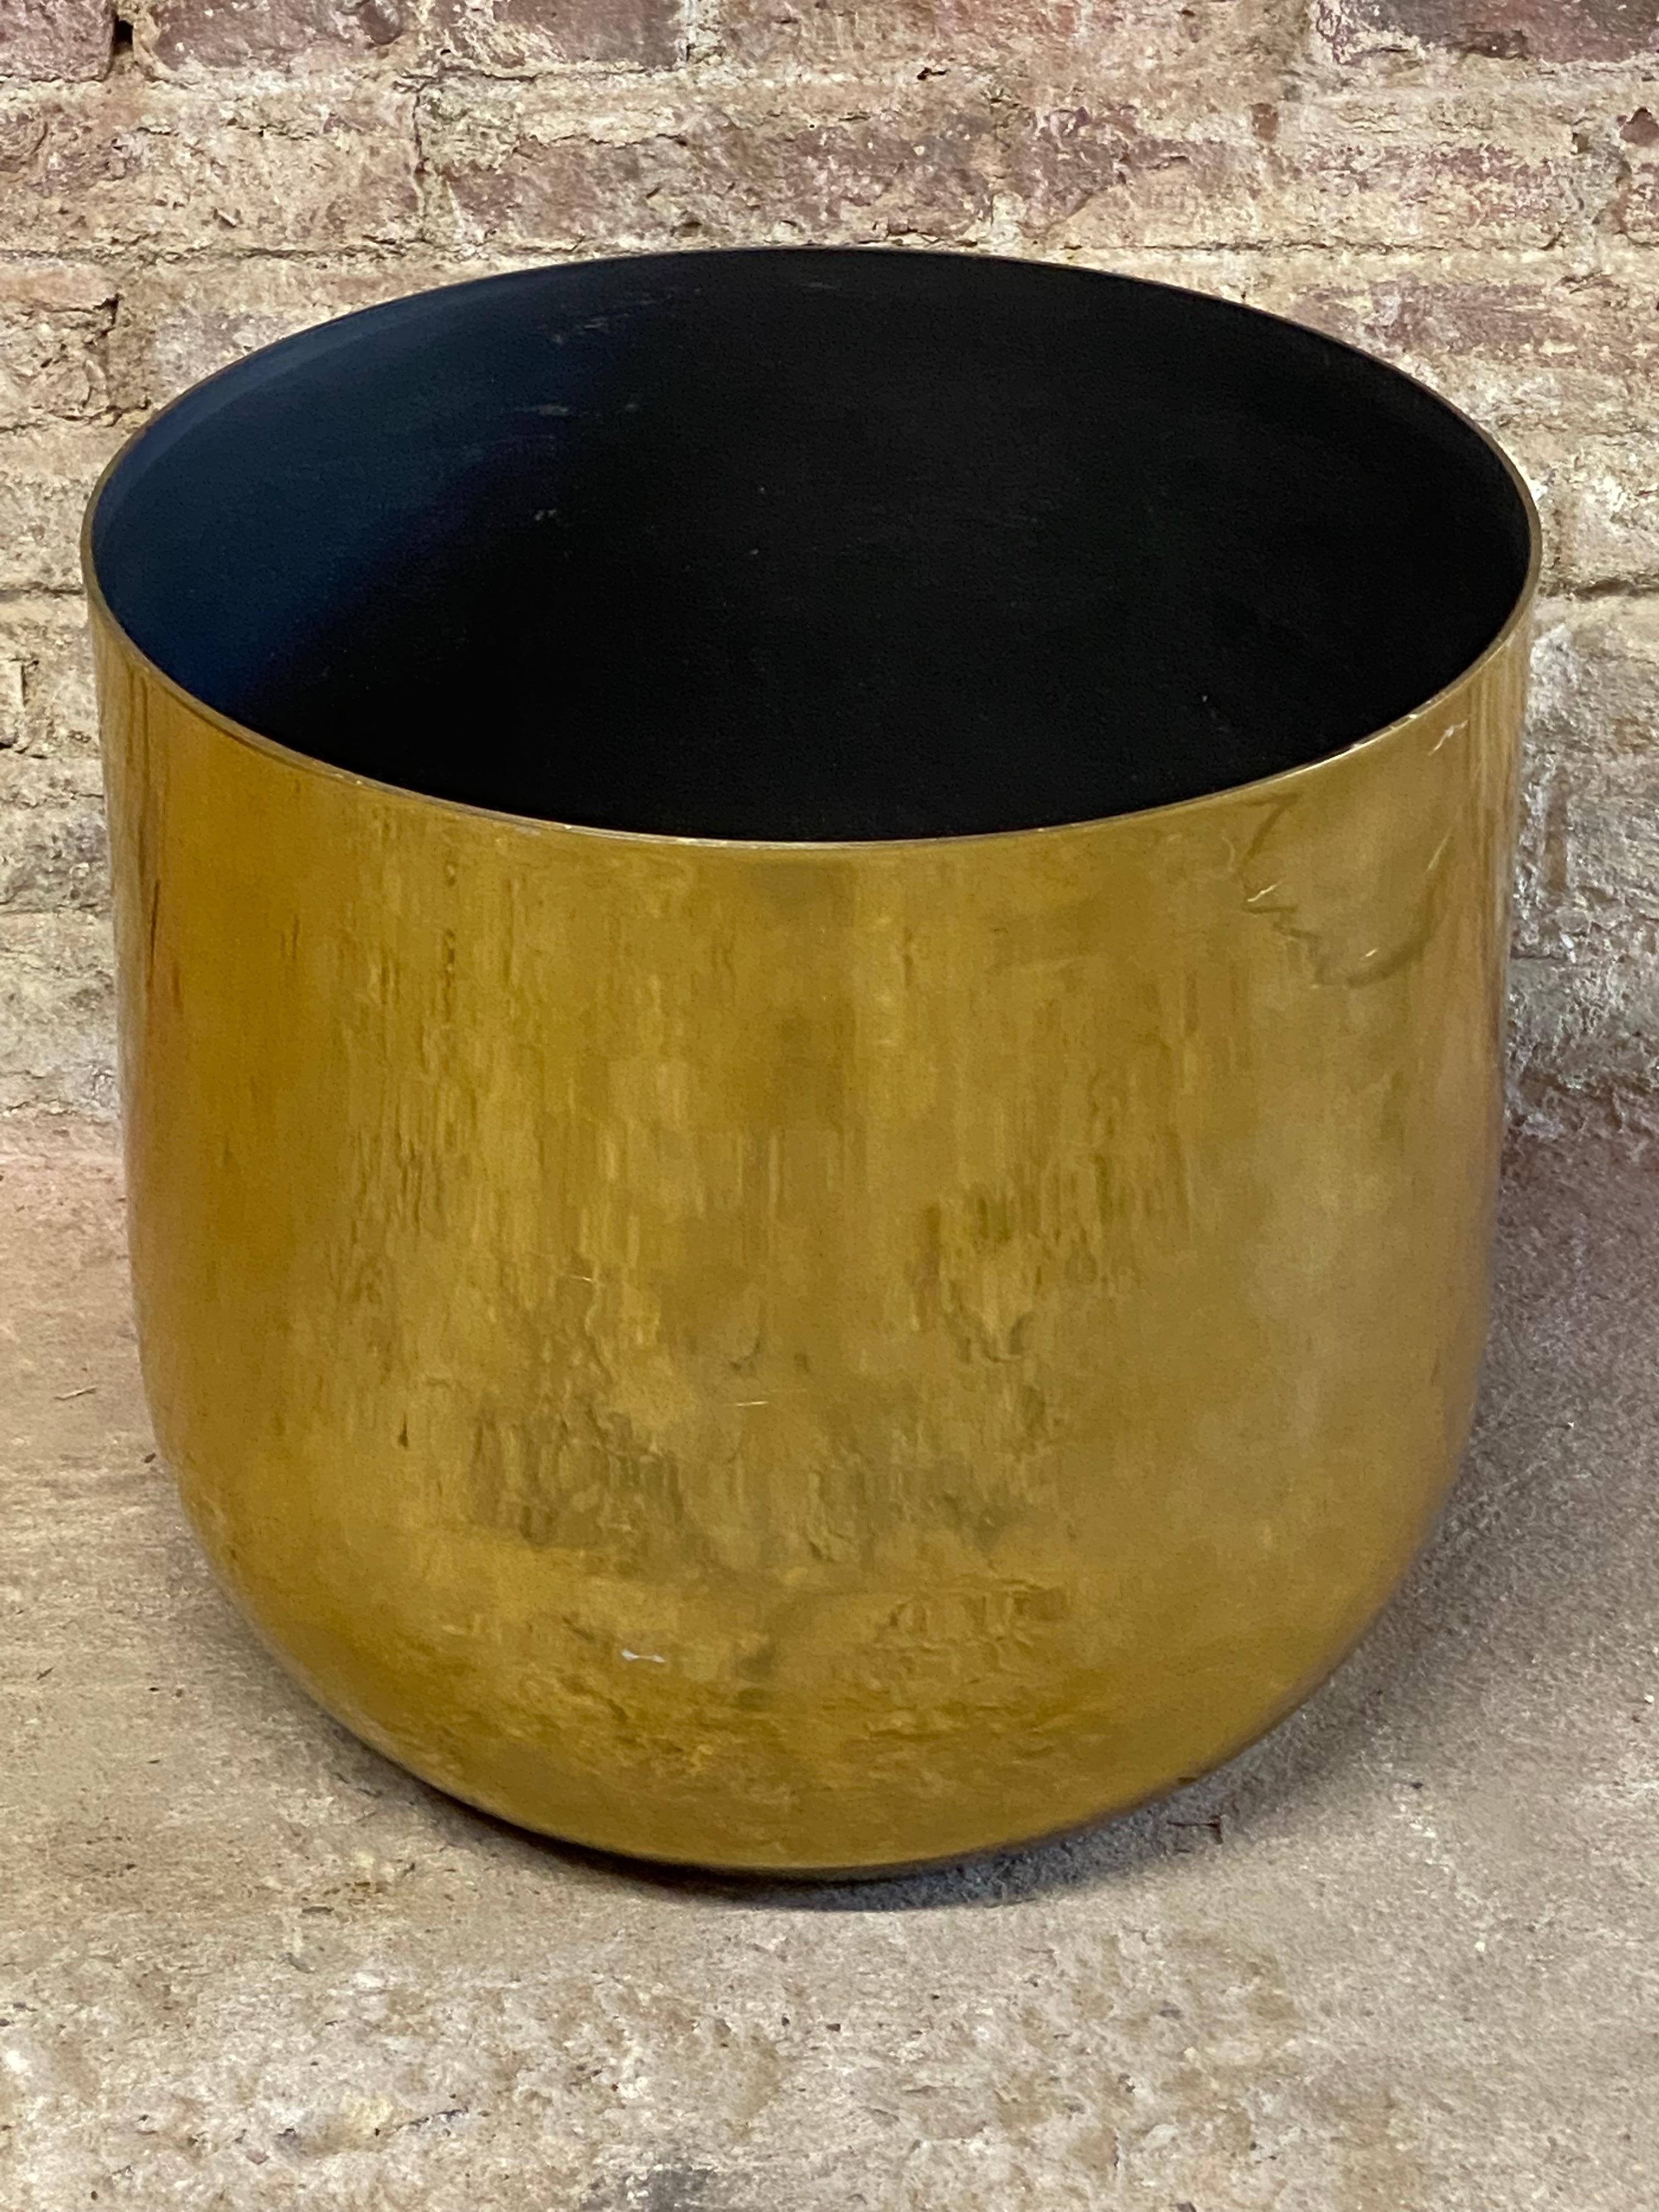 Habitat International large architectural aluminum planter. Wonderful and impressive size brass finish aluminum planter. Architectural Supplements by Paul Mayen, designer. Circa 1975-80. 

Good overall condition with some minor scratches and